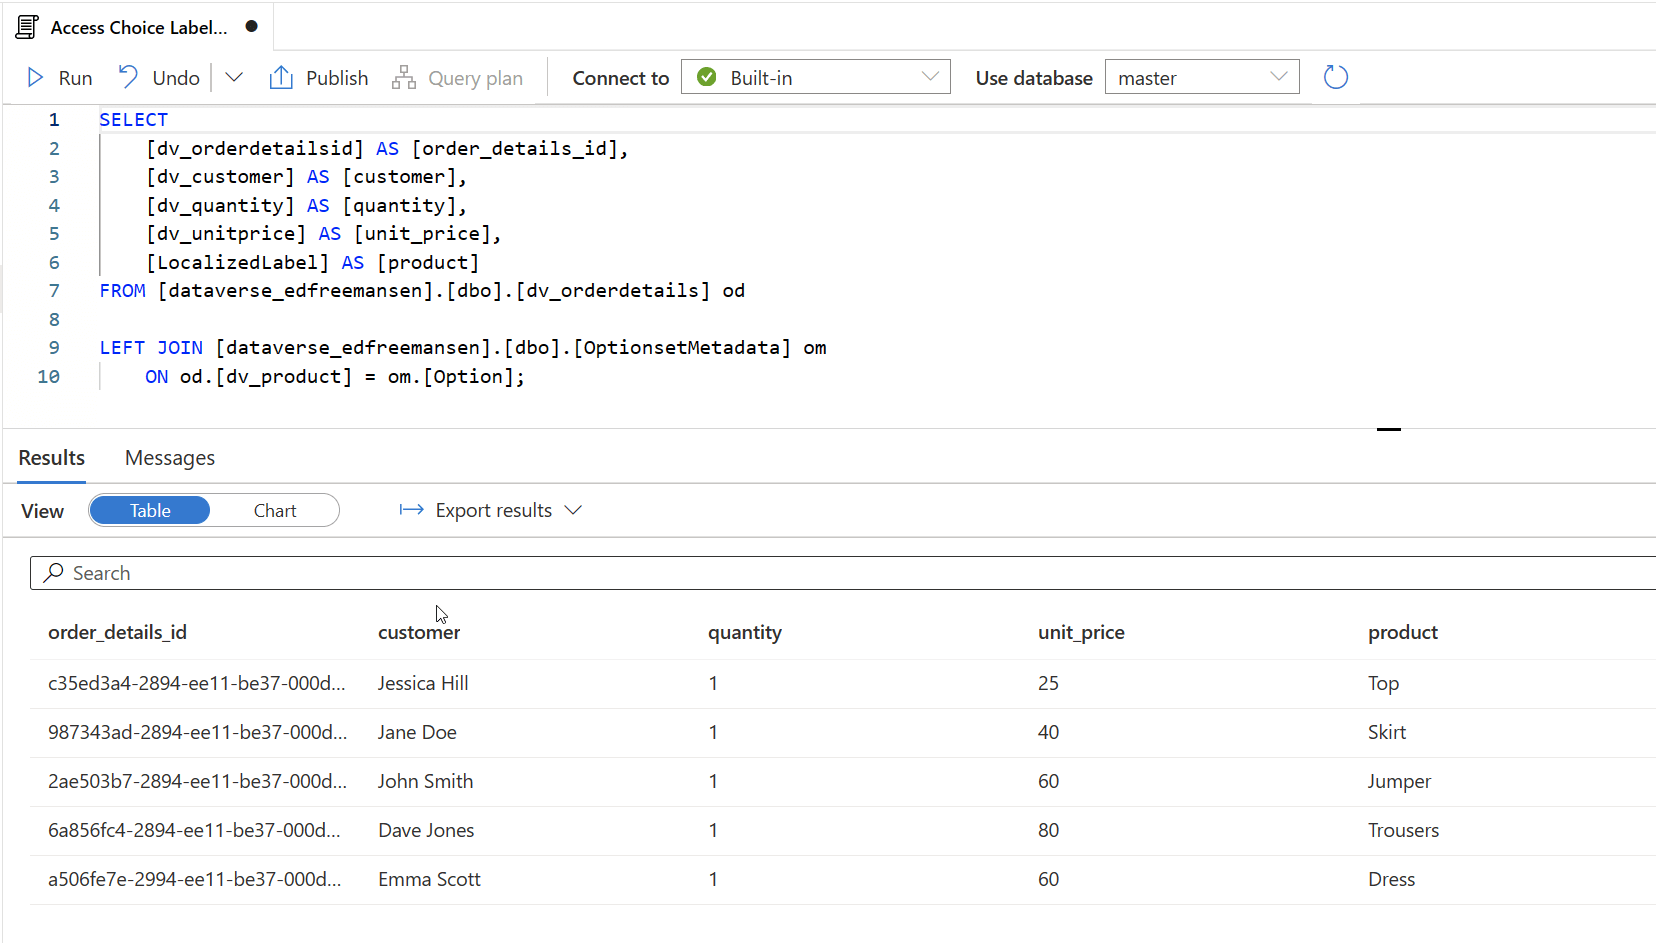 Result of T-SQL query to select columns and replace numerical choice values with text choice labels.